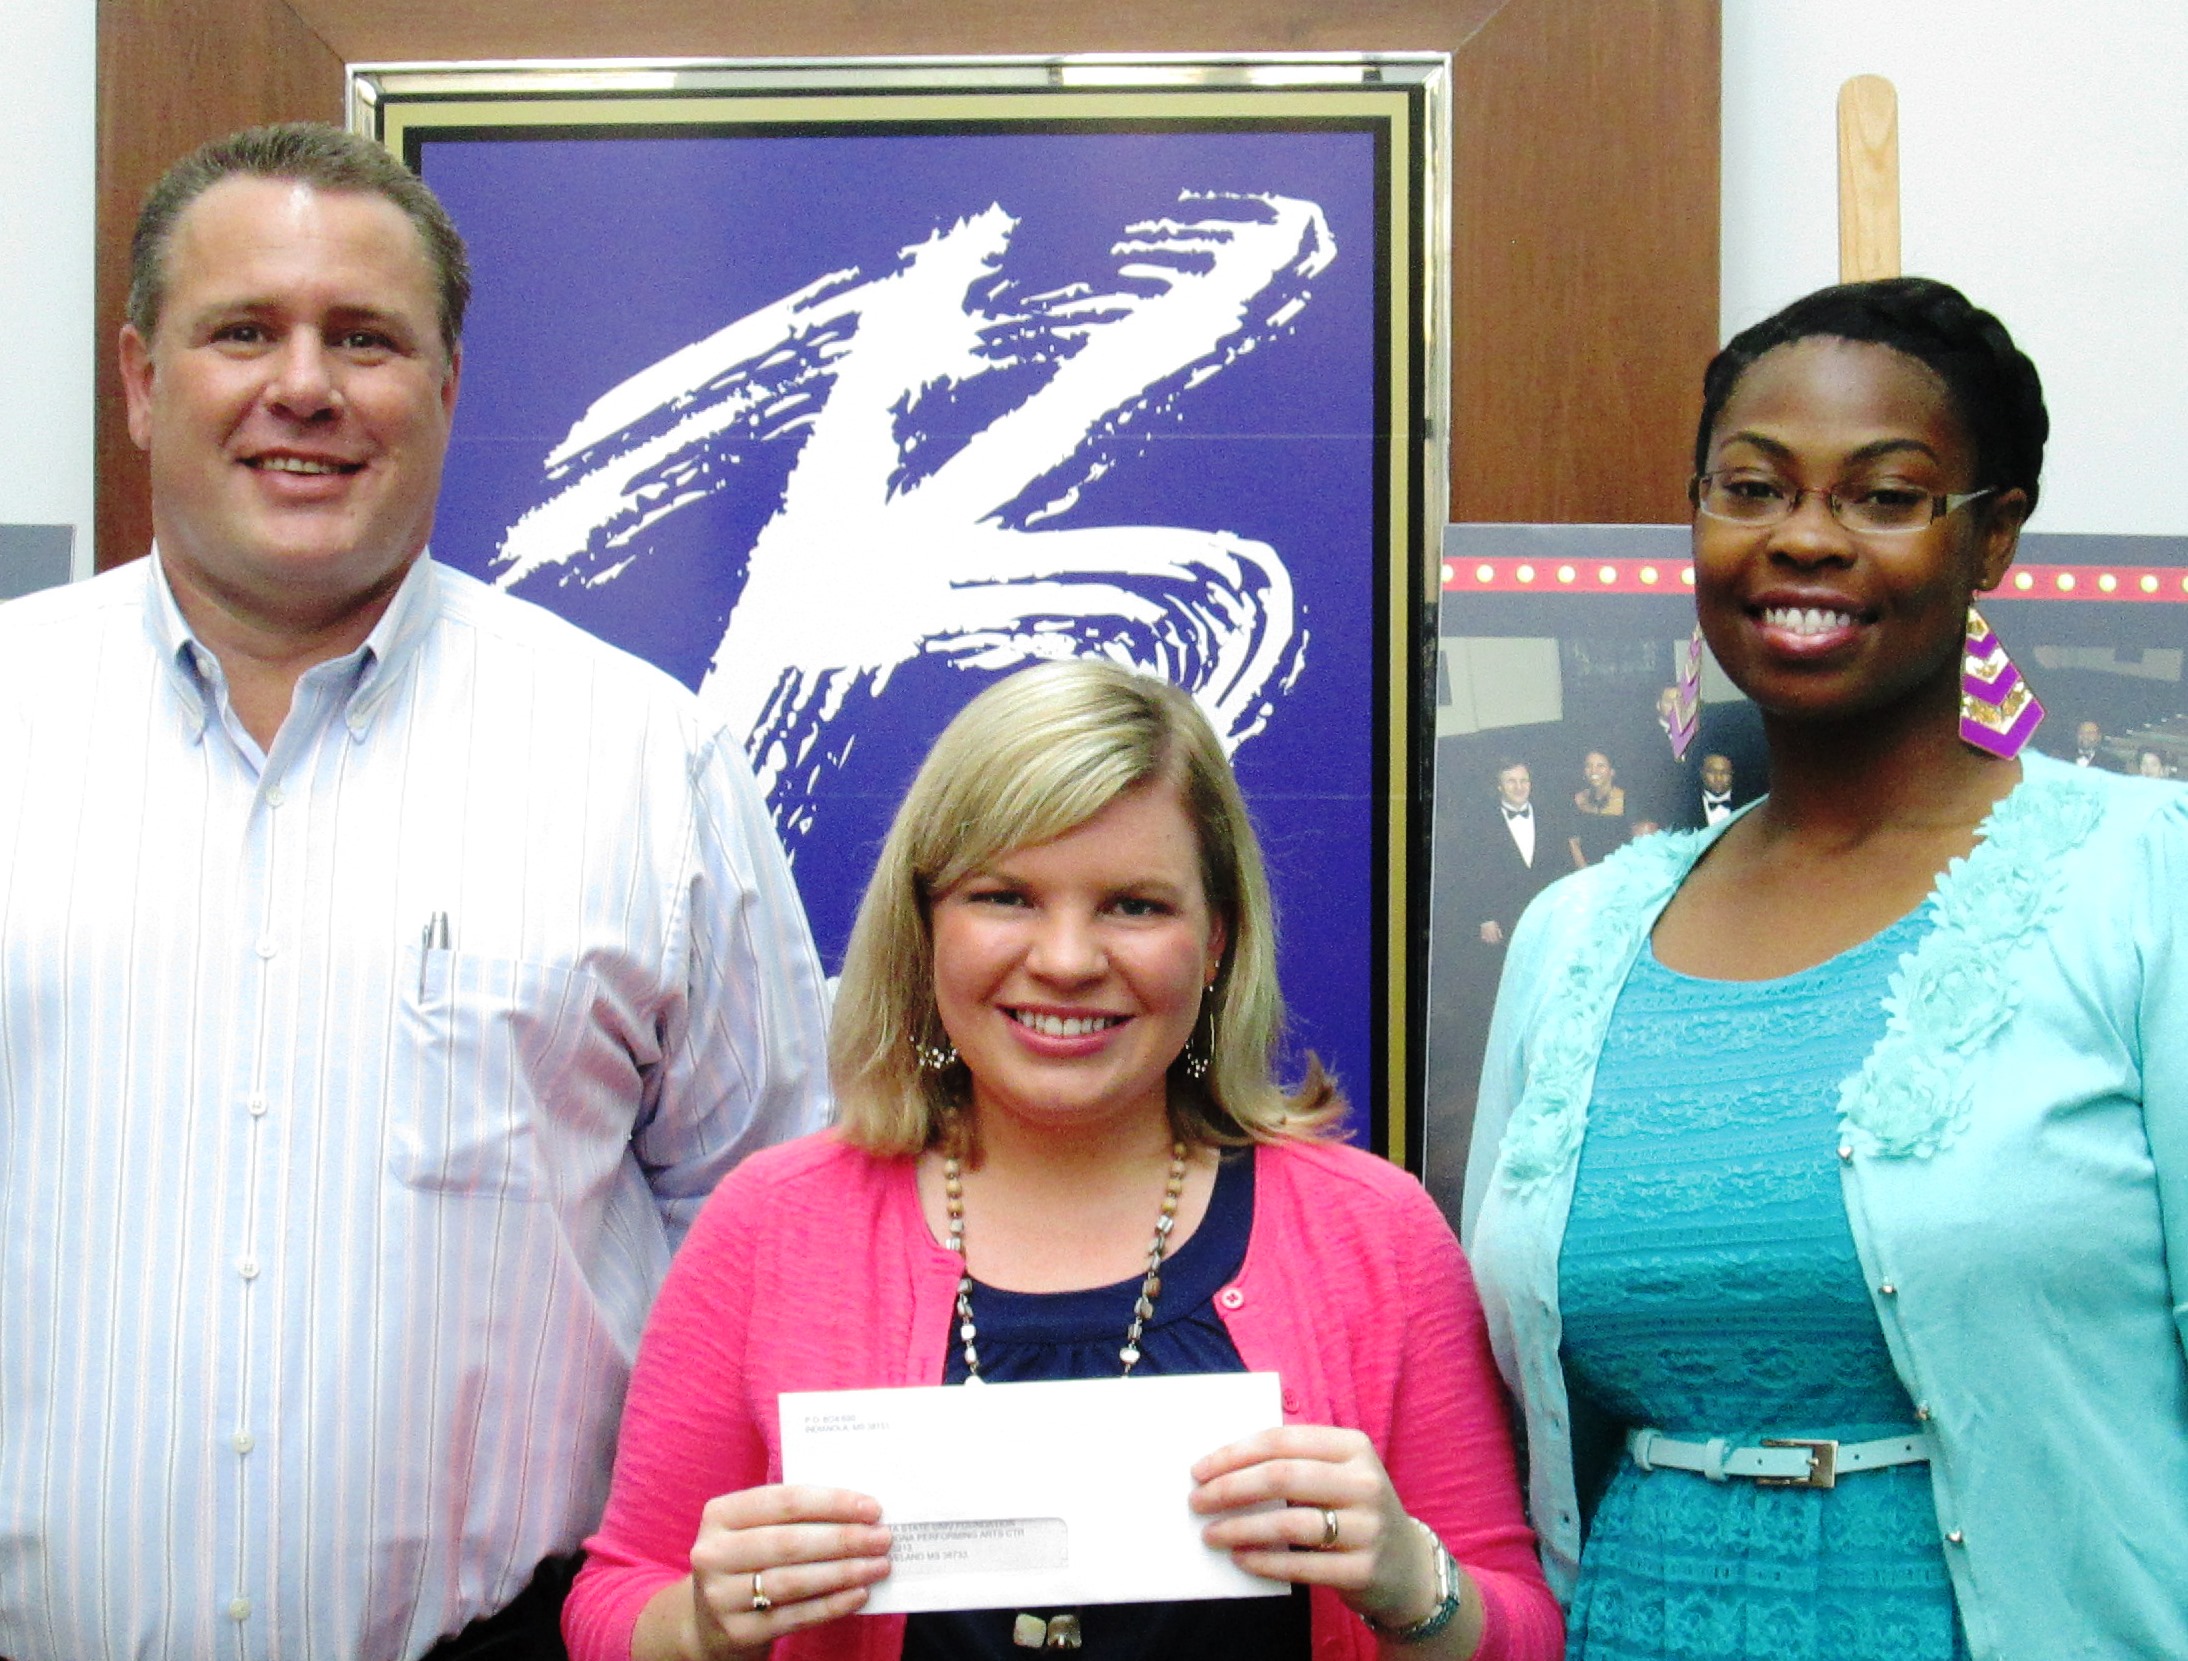 Damon Cranford (left), Director of Marketing, and Curlina Williams (right), Marketing Manager for Double Quick, Inc. present a check for Arts Education Fueled by Double Quick to Whitney Cummins (middle), BPAC Arts Education Coordinator